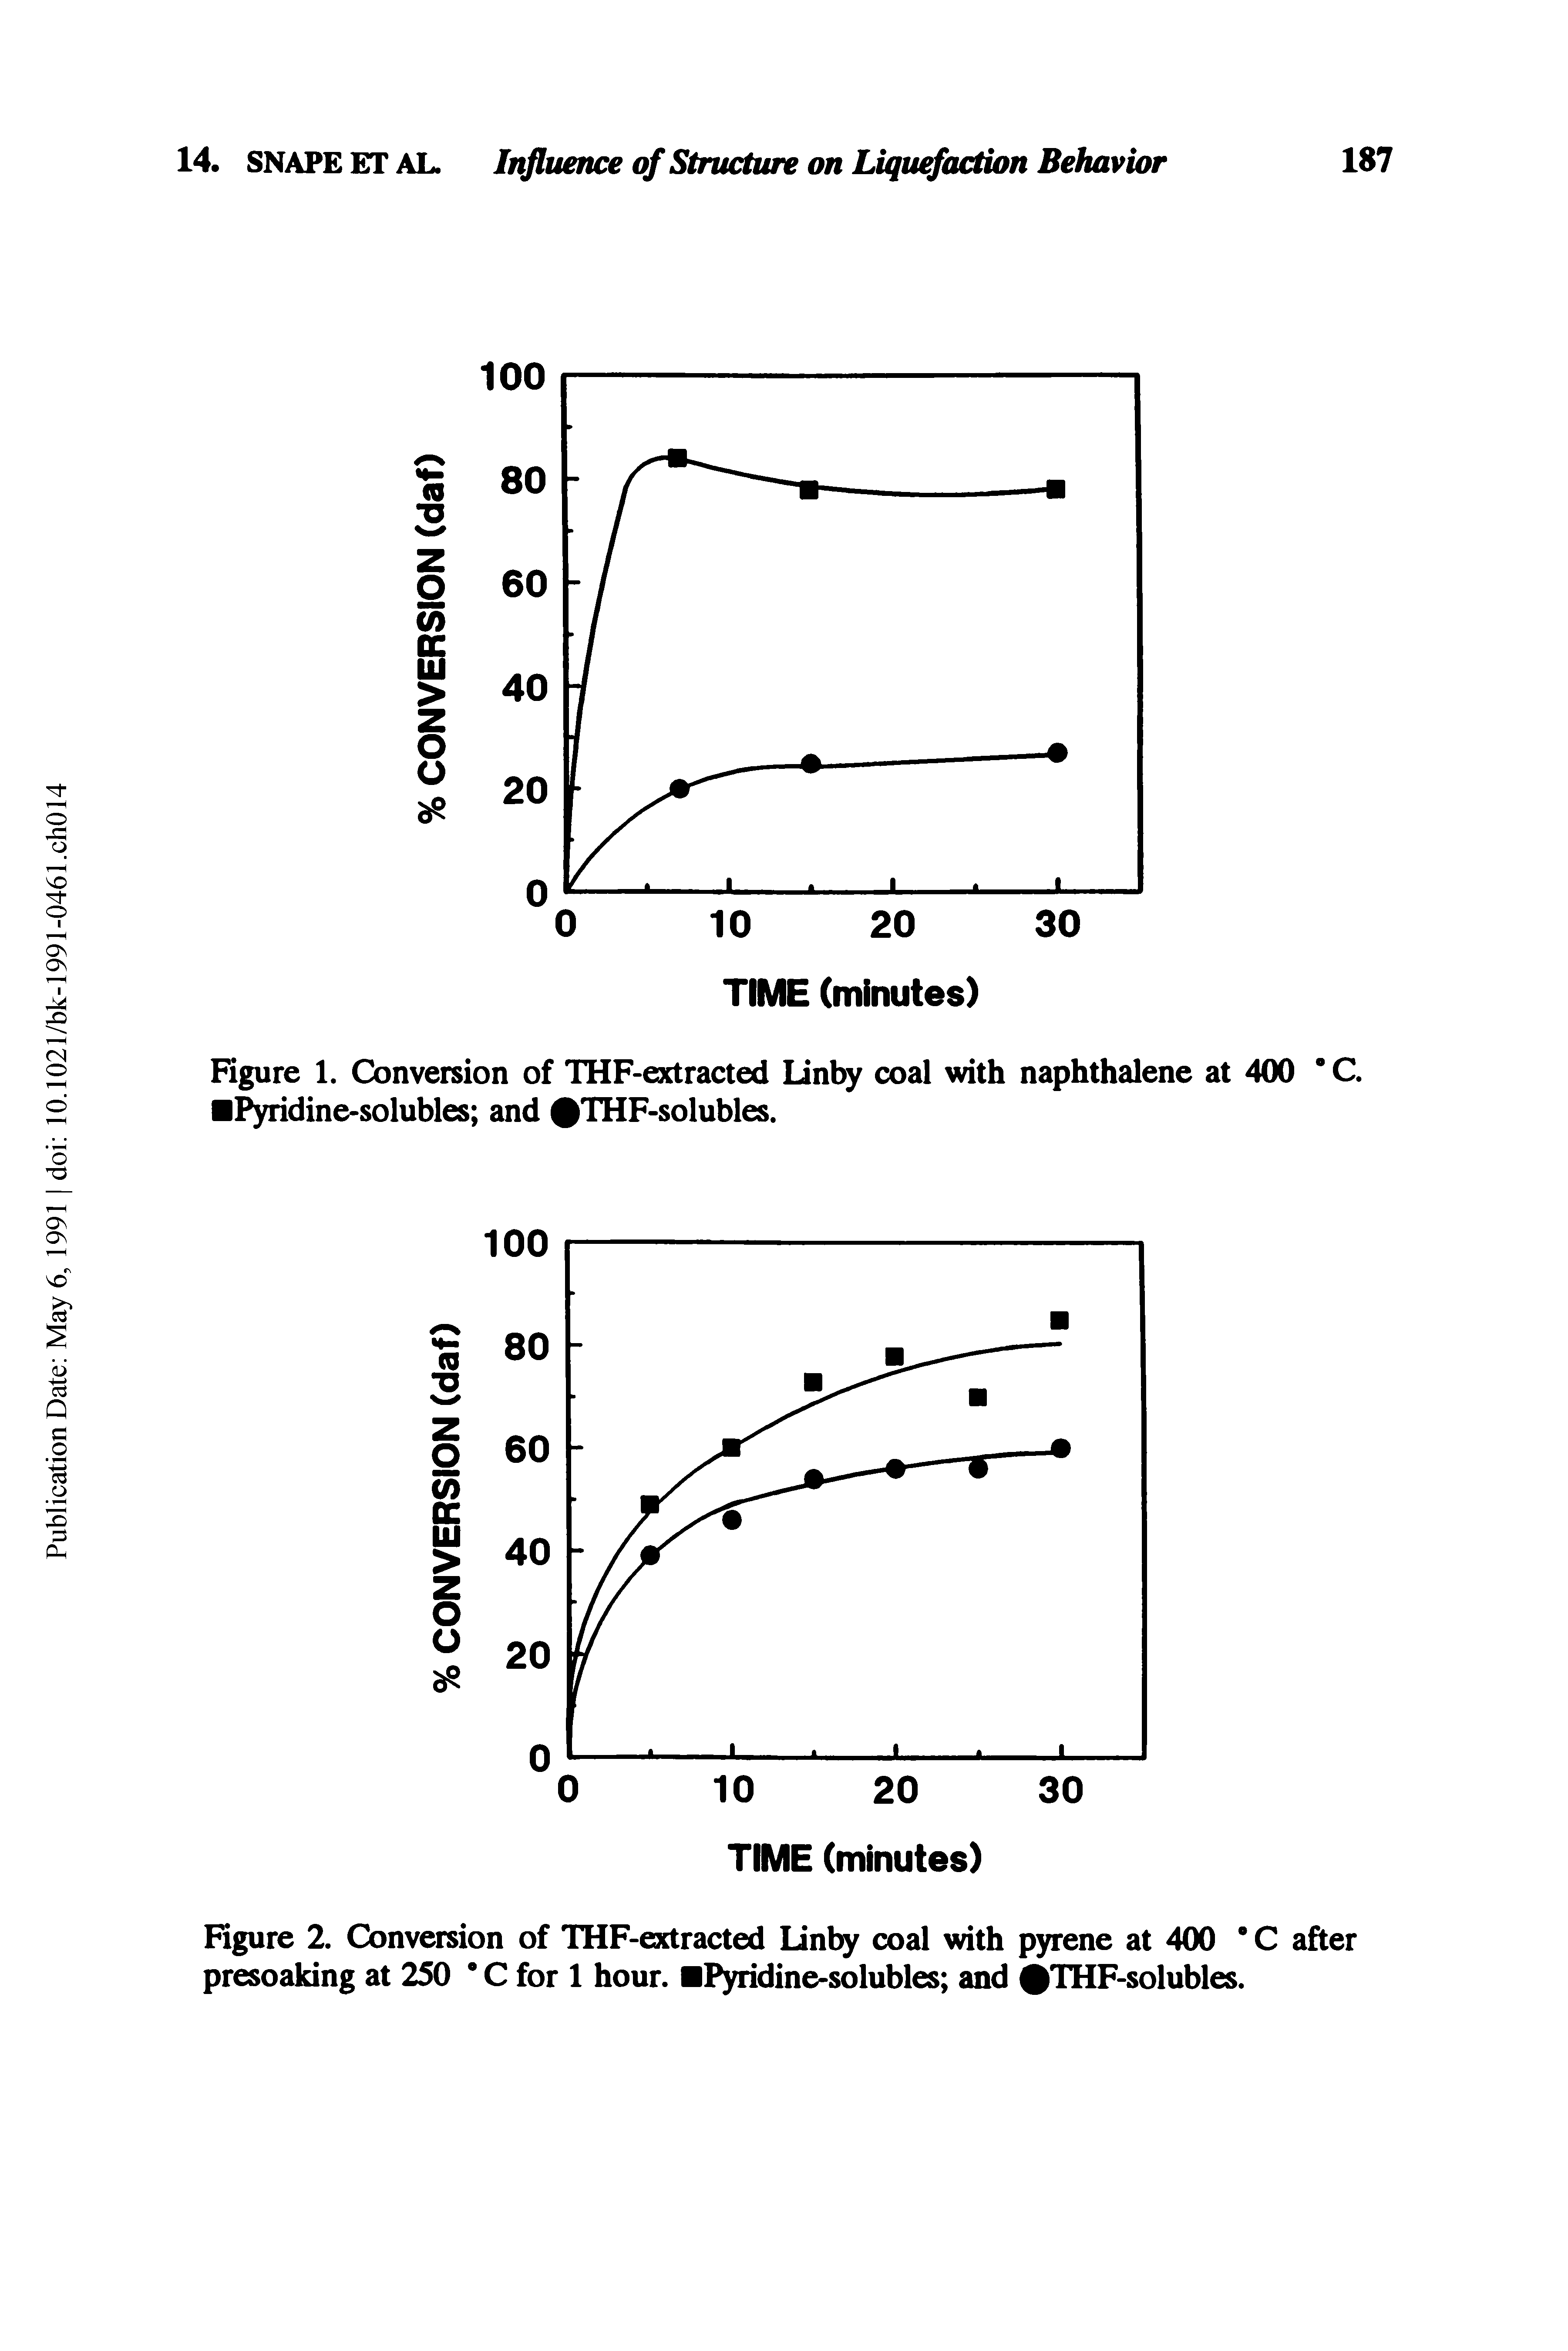 Figure 1. Conversion of THF-extracted Linby coal with naphthalene at 400 C. Pyridine-solubles and THF-solubles.